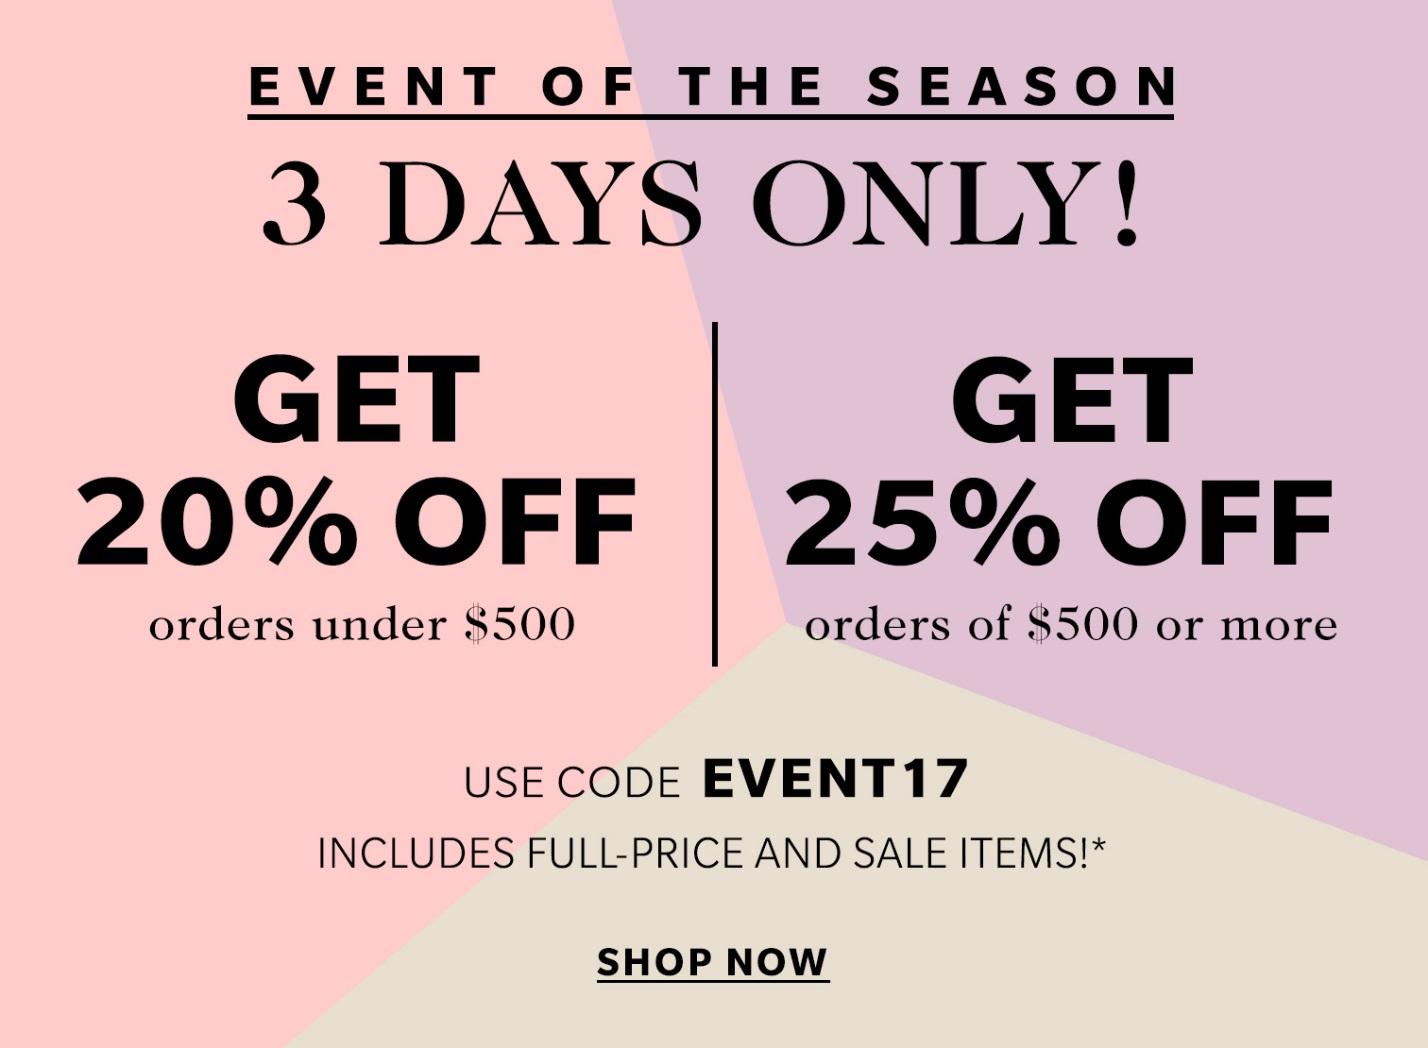 Shopbop sale with up to 25% off designer pieces